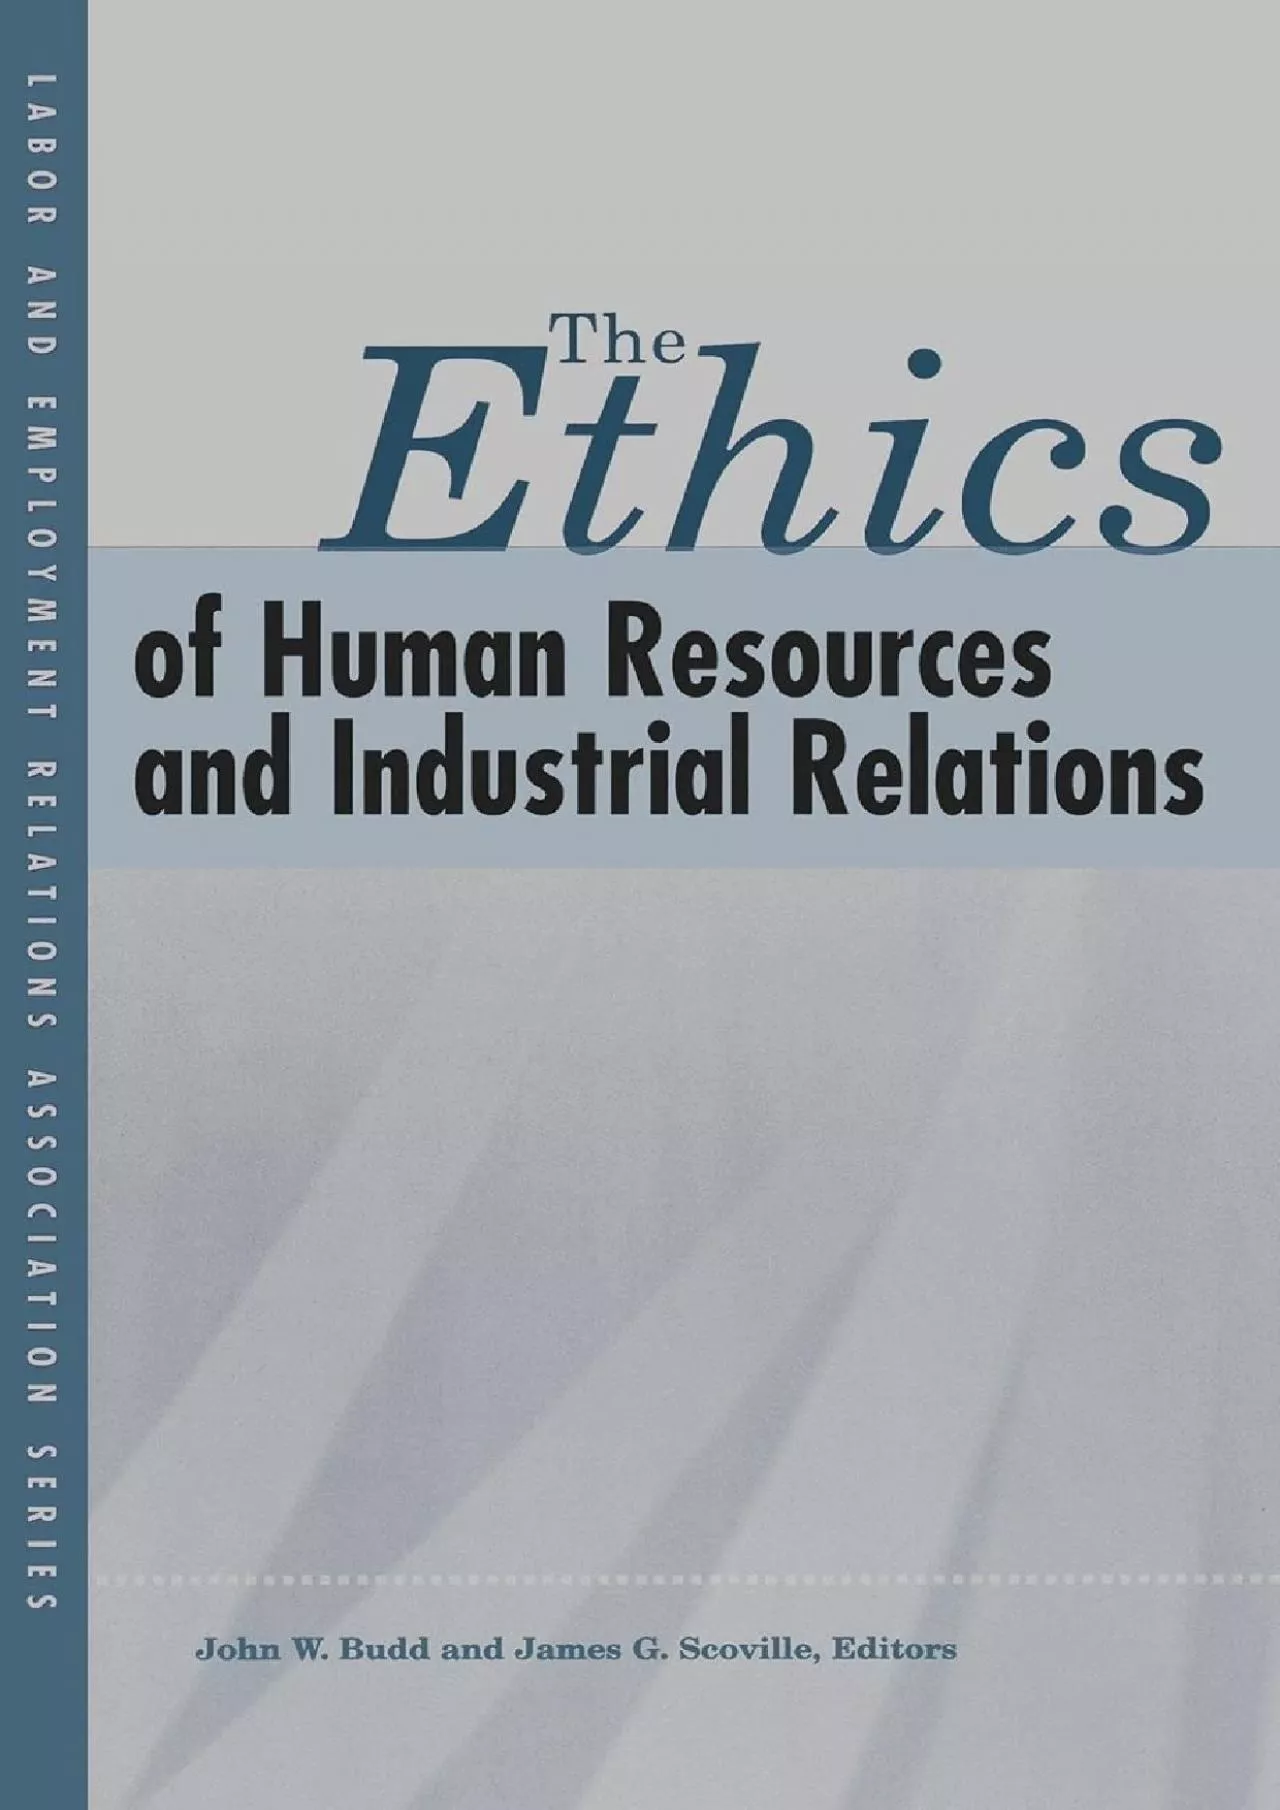 (DOWNLOAD)-The Ethics of Human Resources and Industrial Relations (LERA Research Volume)